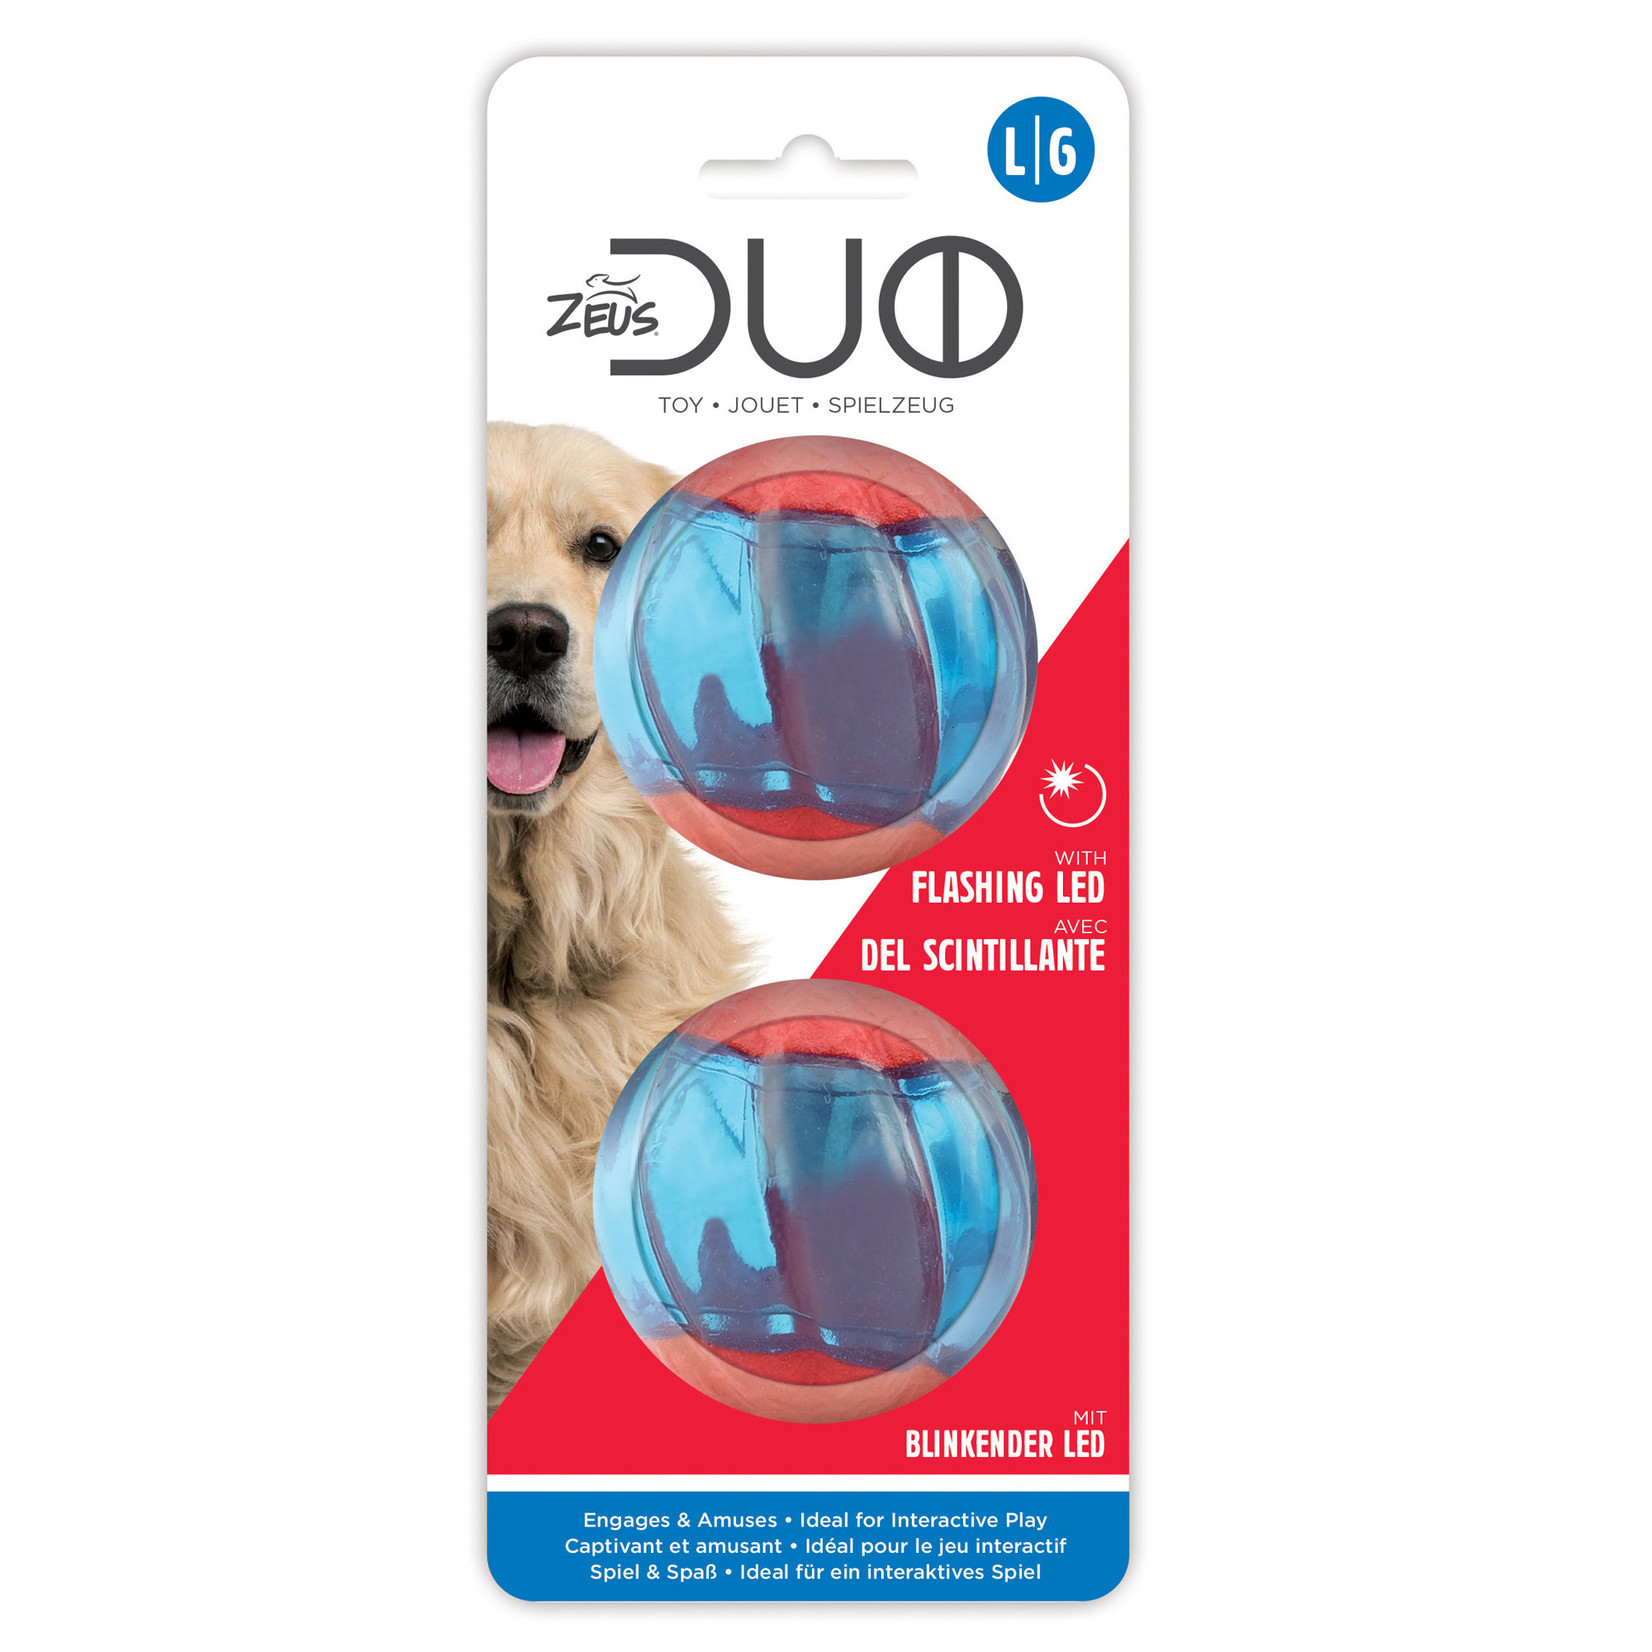 Zeus Zeus Duo Ball Dog Toy with Flashing LED - Large - 2 pack - 6.3 cm (2.5 in)